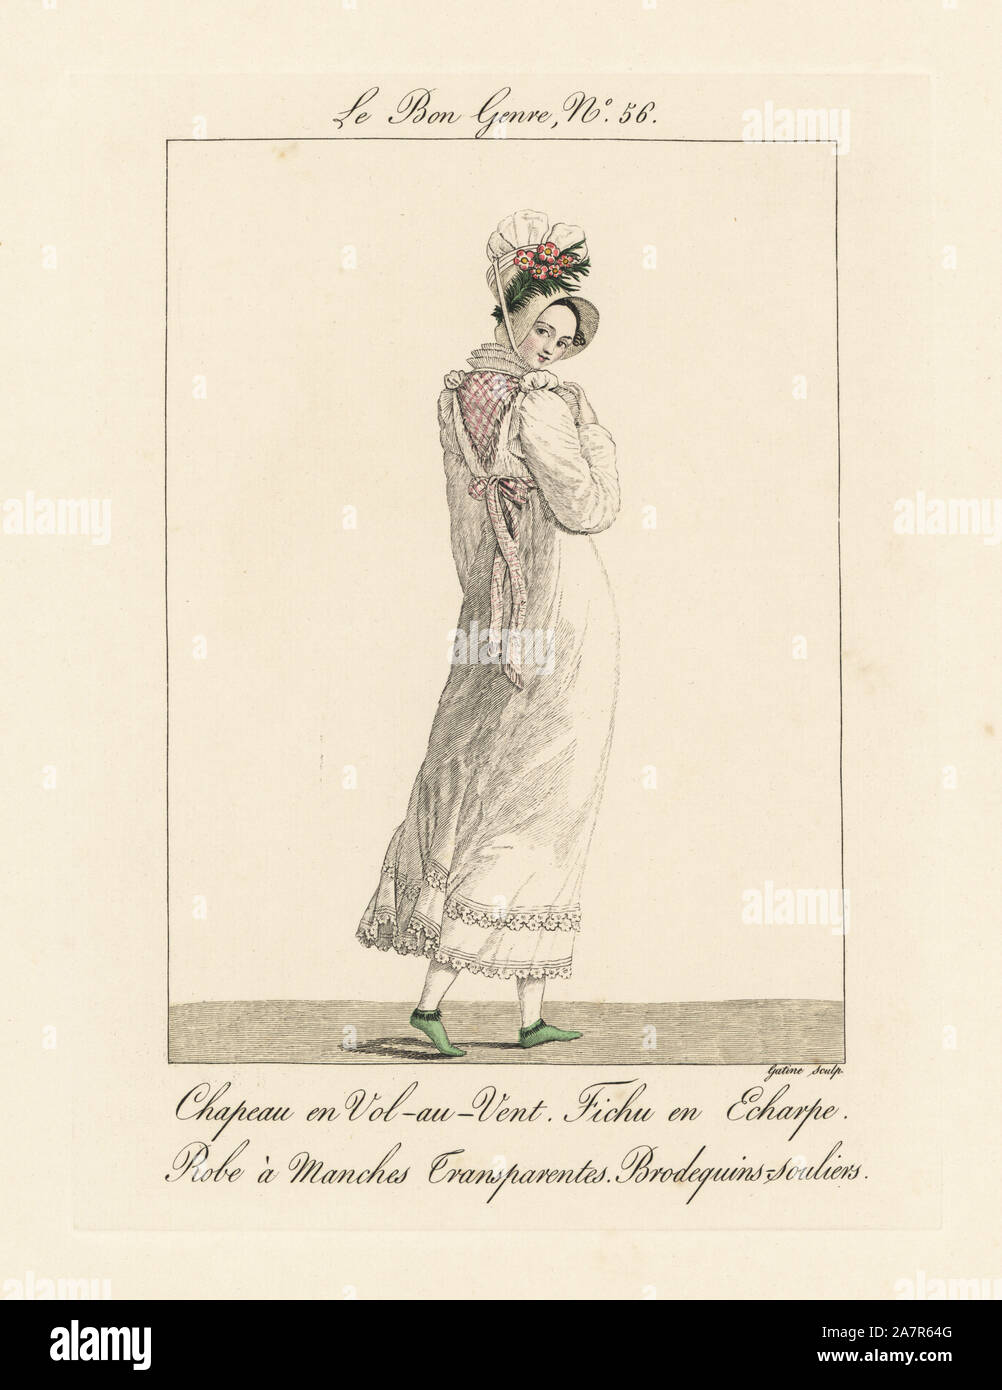 Woman in vol-au-vent bonnet, scarf, dress with transparent sleeves and  brodequin bootees. 